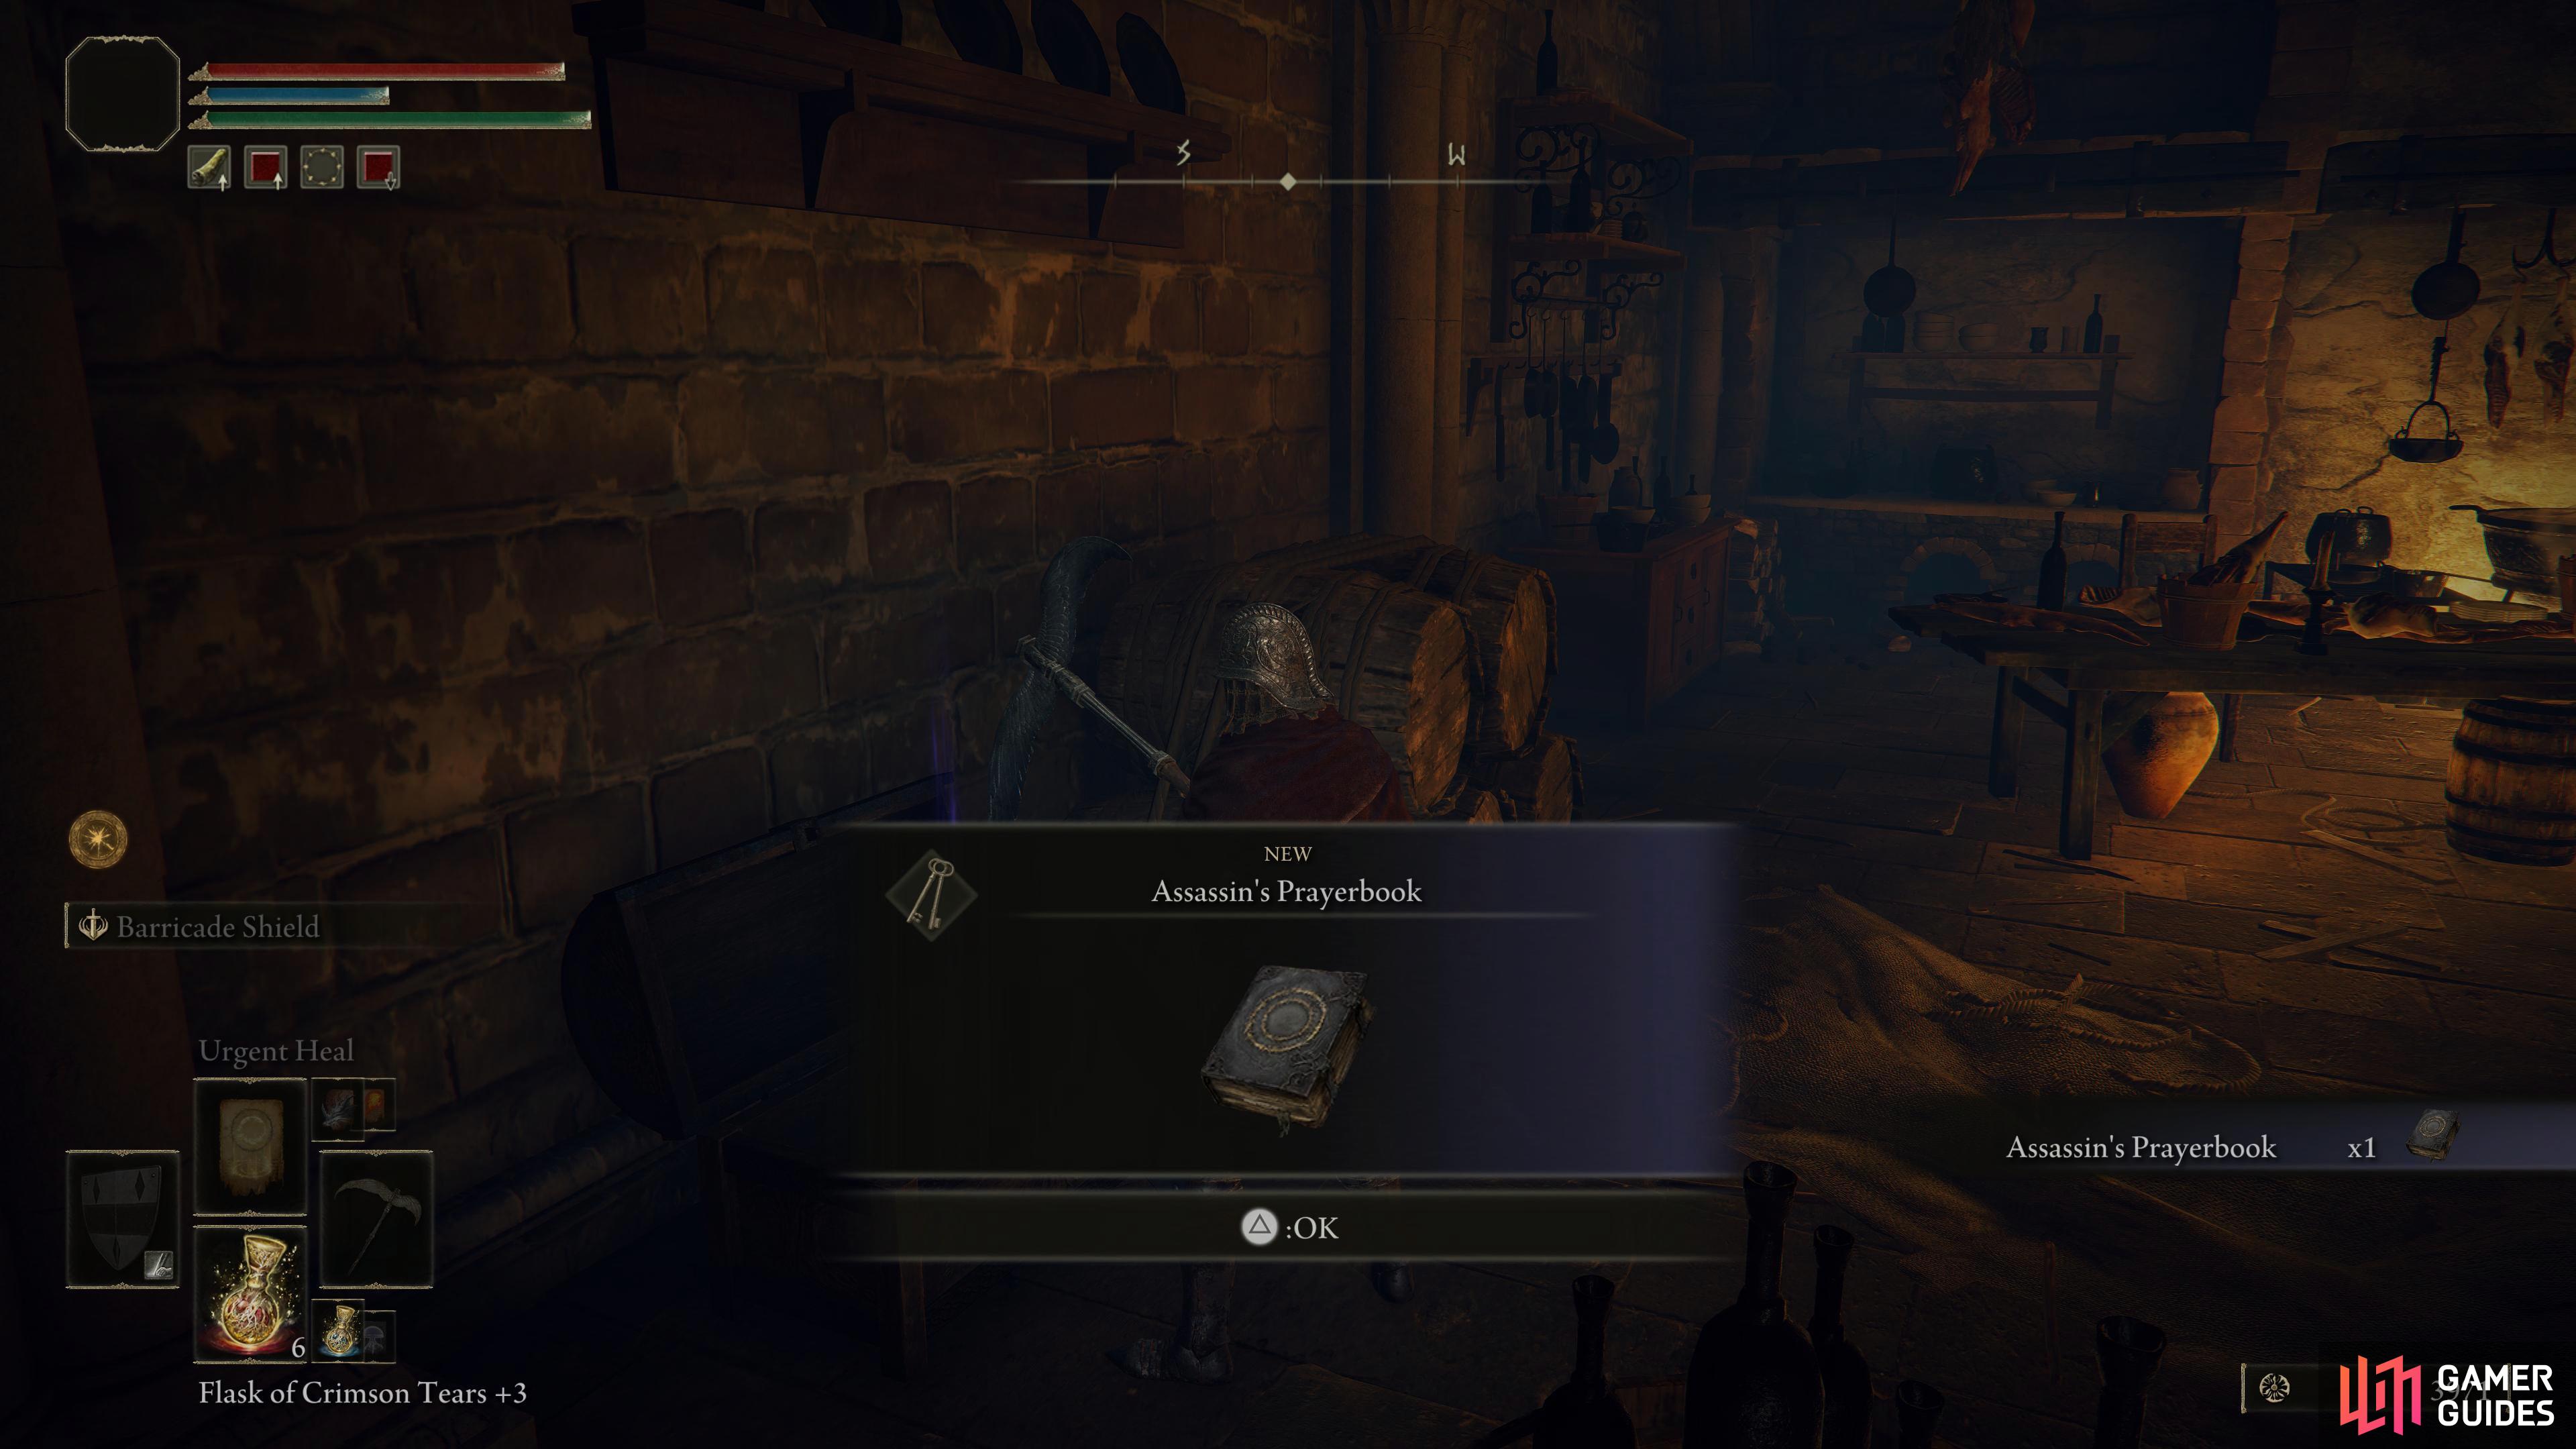 You can hand the Assassin’s Prayerbook found in the Hold to Corhyn for more Incantations.